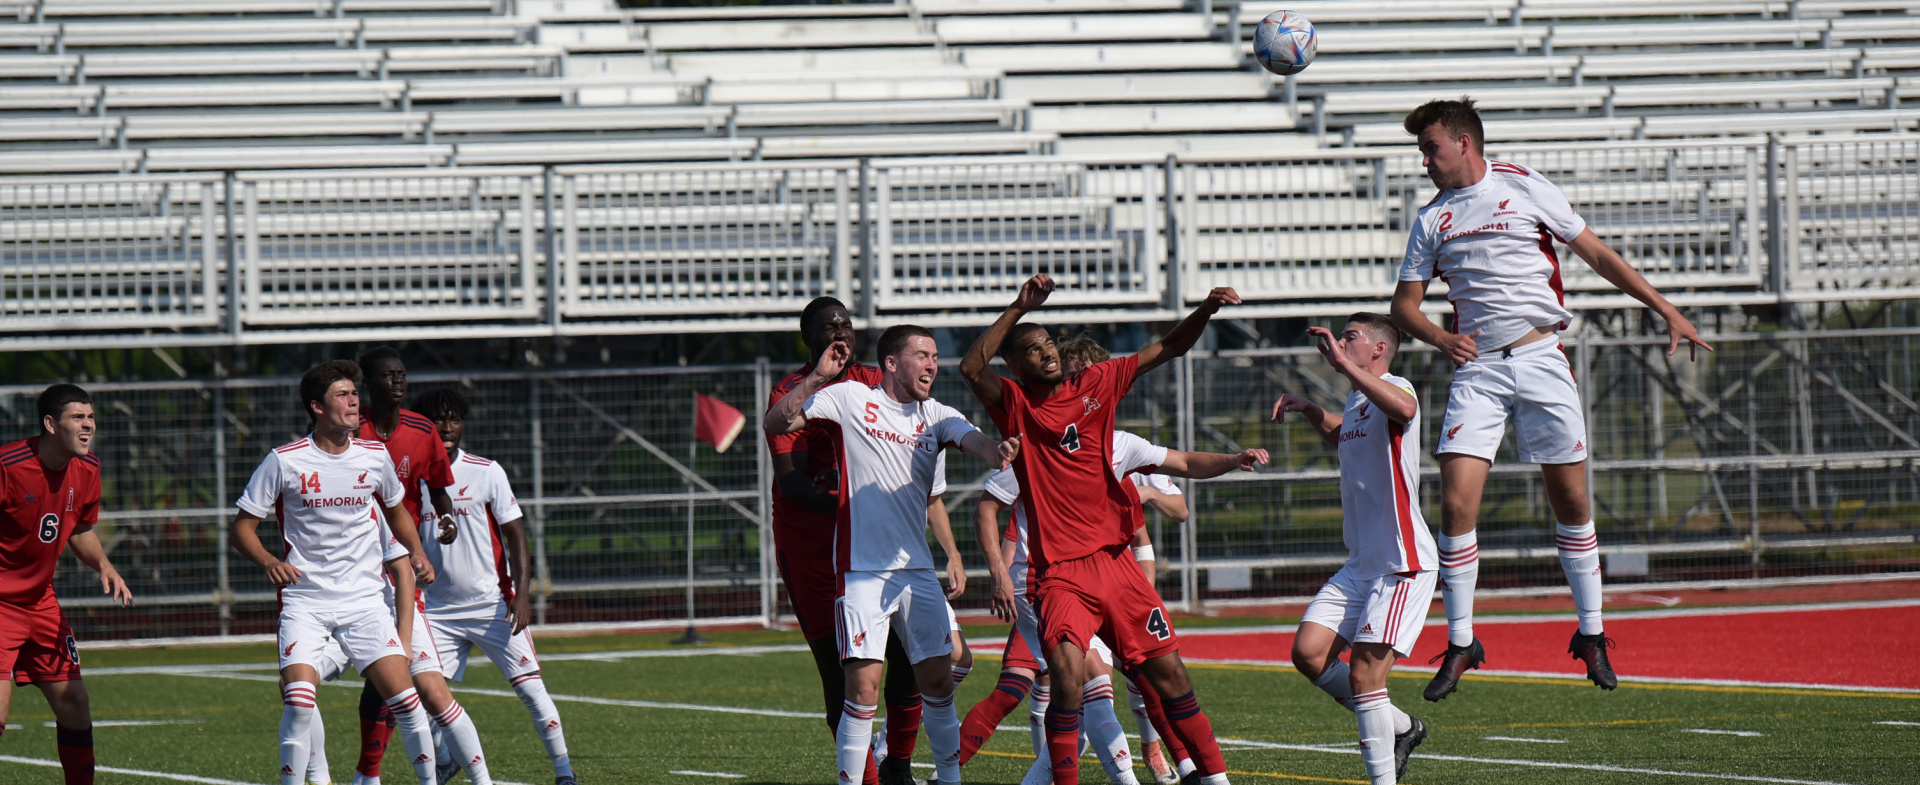 Sea-Hawks Host Capers for Home Openers